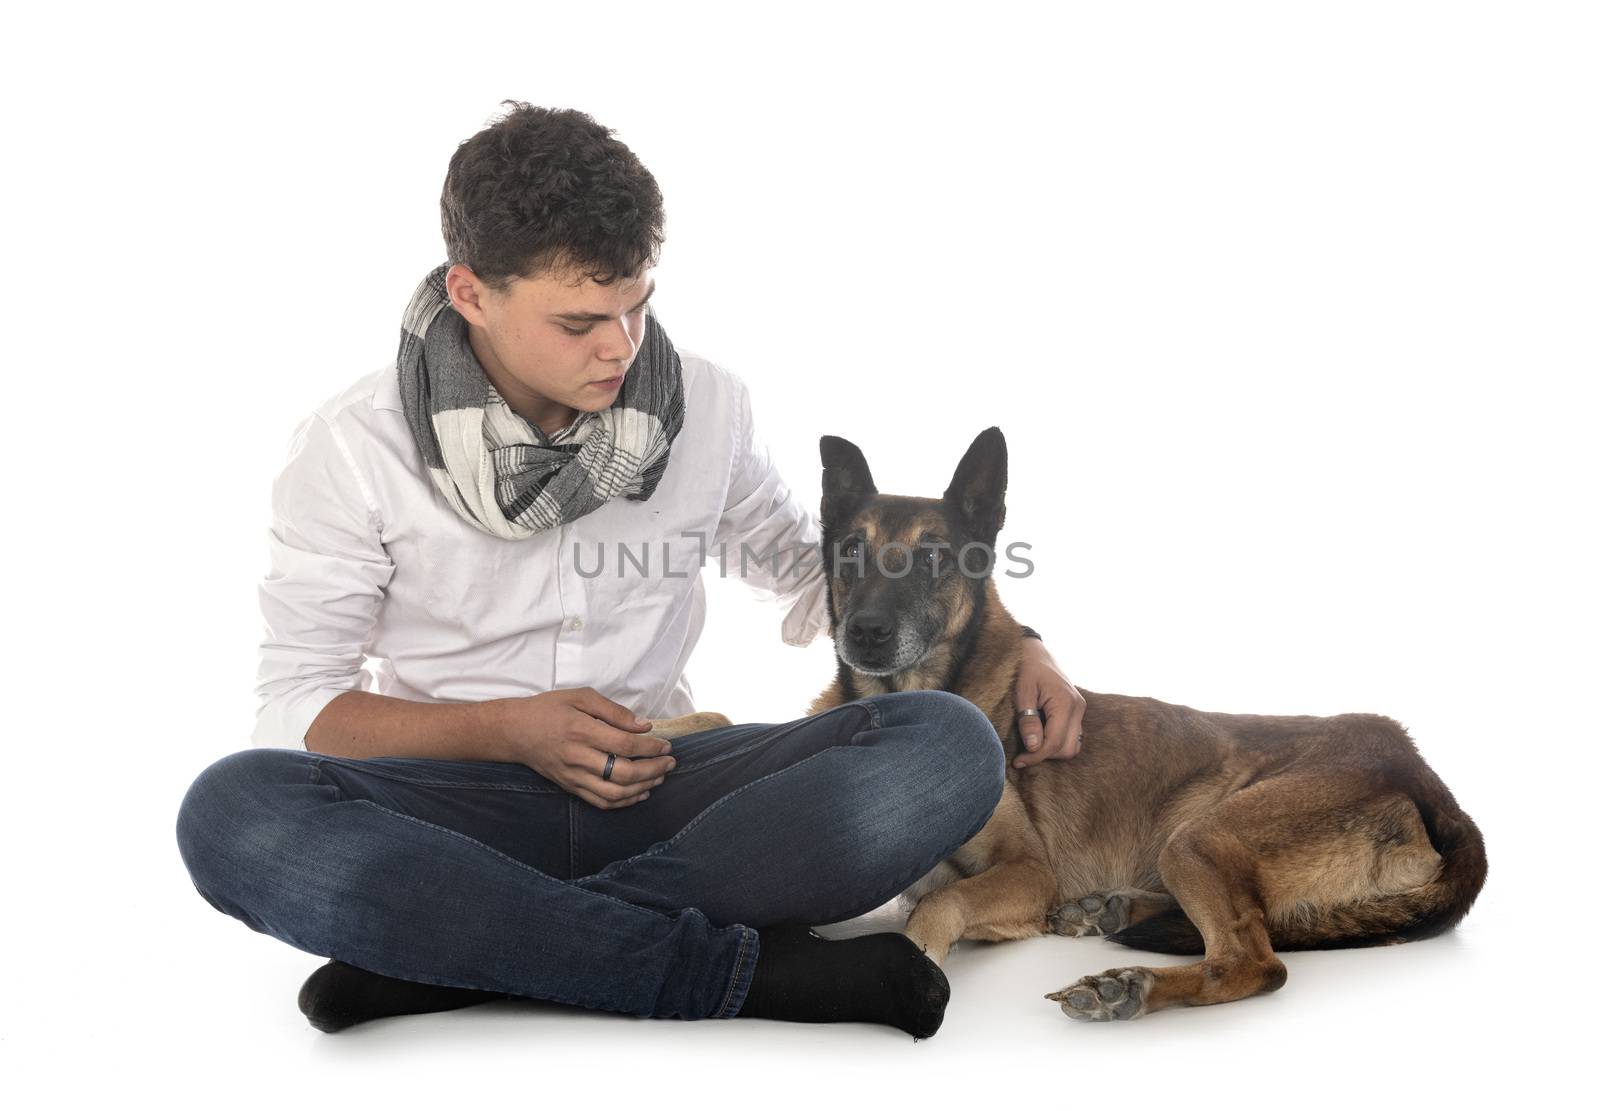 old belgian shepherd and owner in front of white background